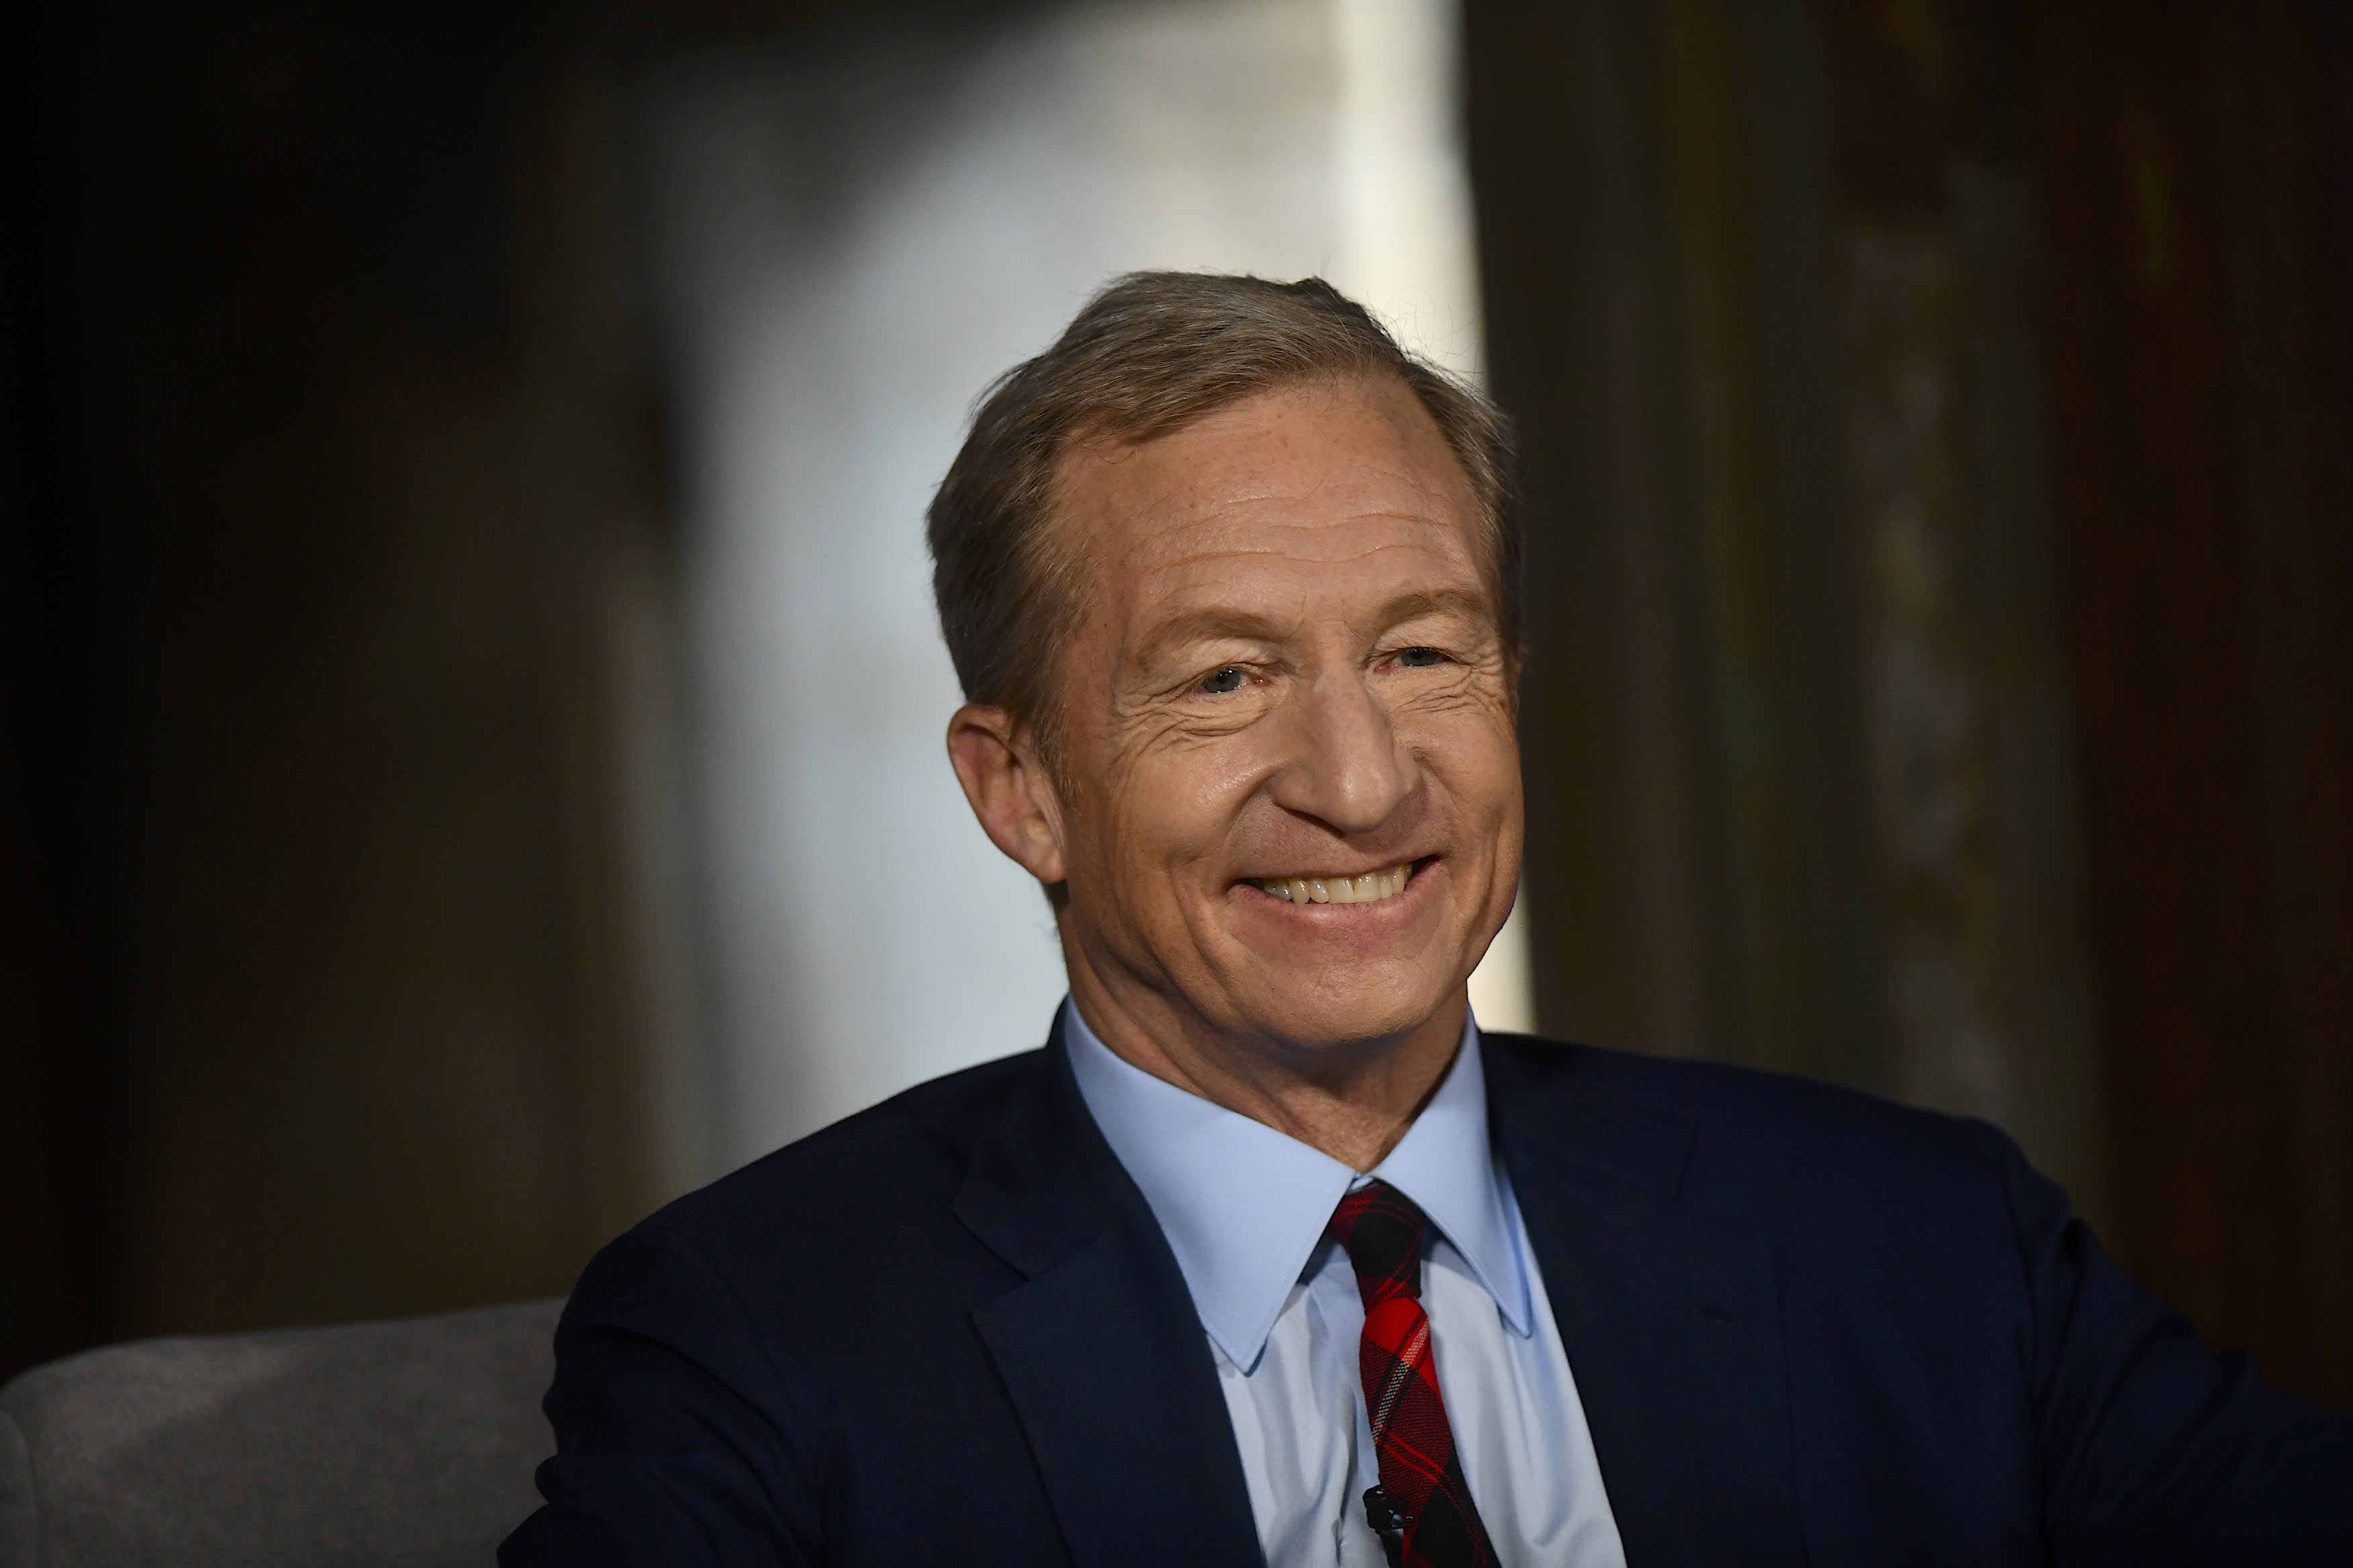 Watch CNBC's full interview with 2020 Democratic candidate Tom Steyer